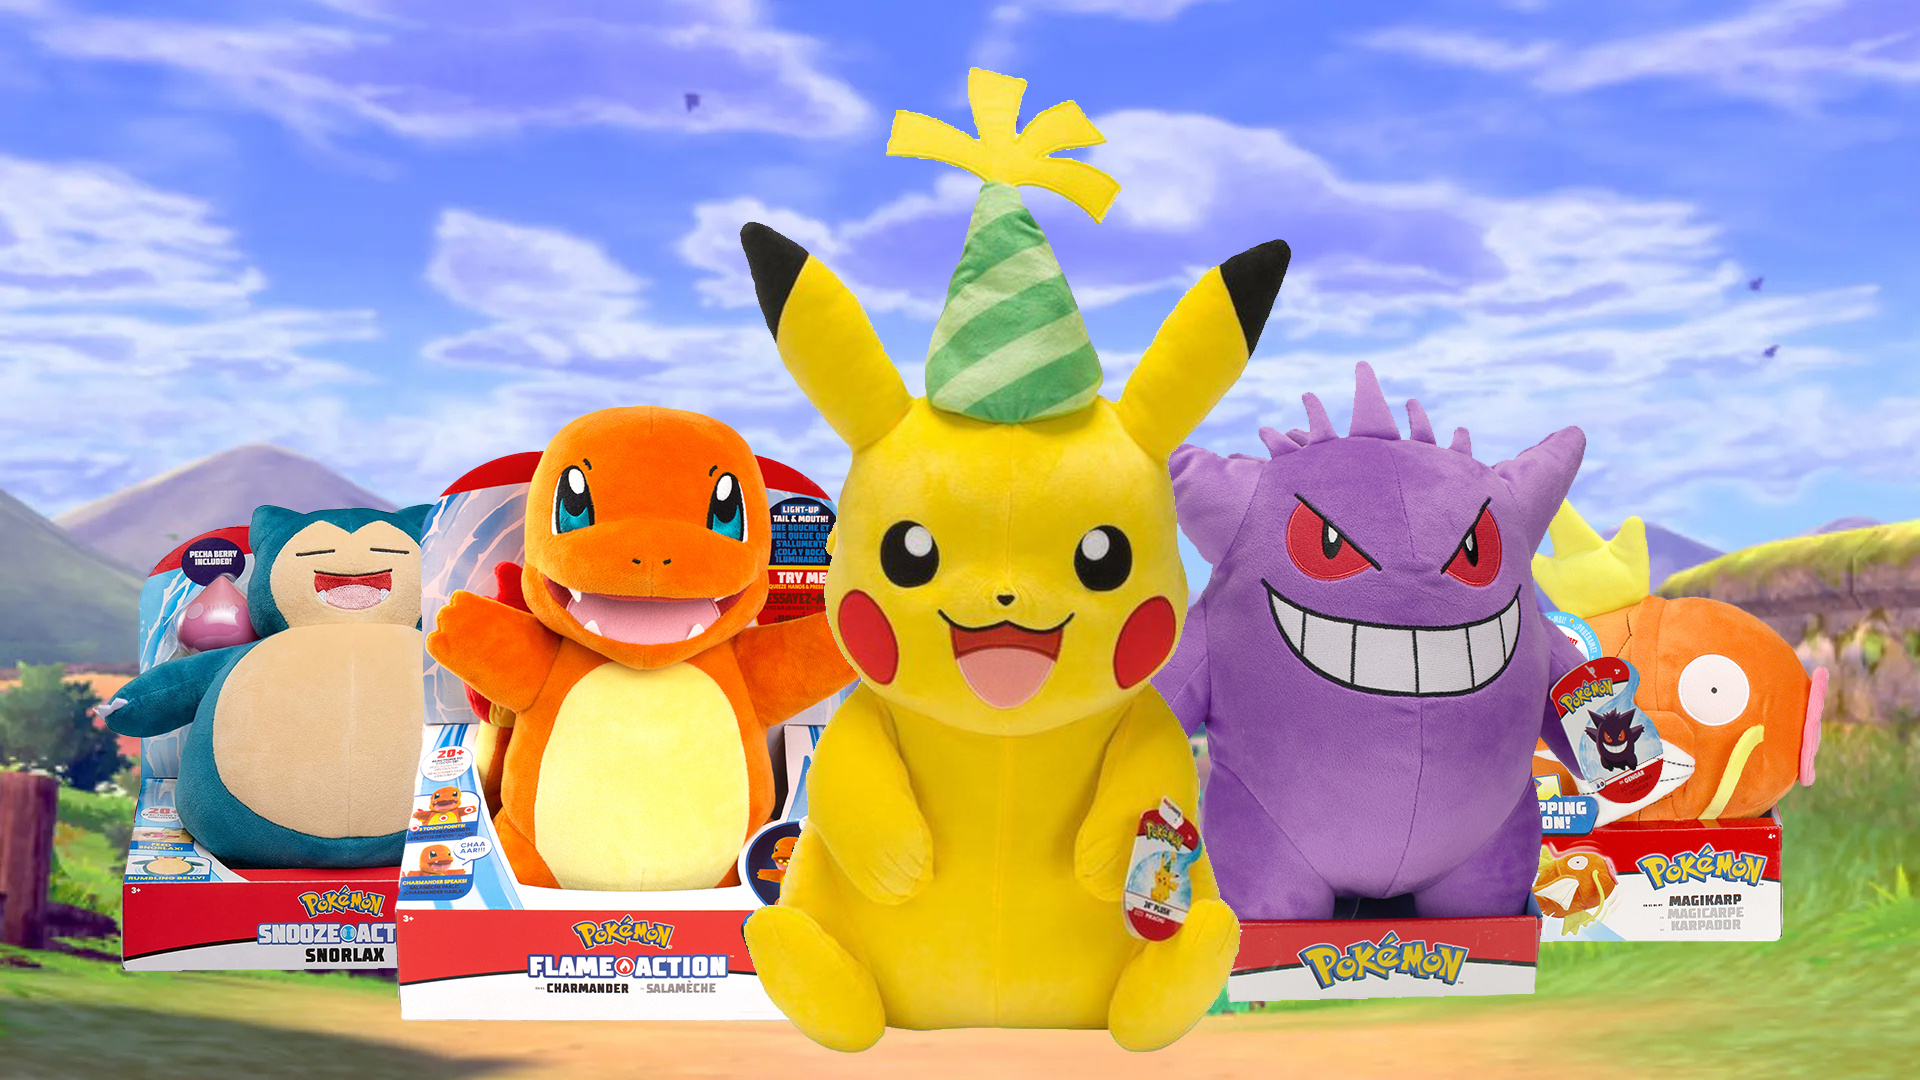 Celebrate Pokemon S 25th Anniversary With 25 Toys And Plushes From Jazwares Guide Nintendo Life